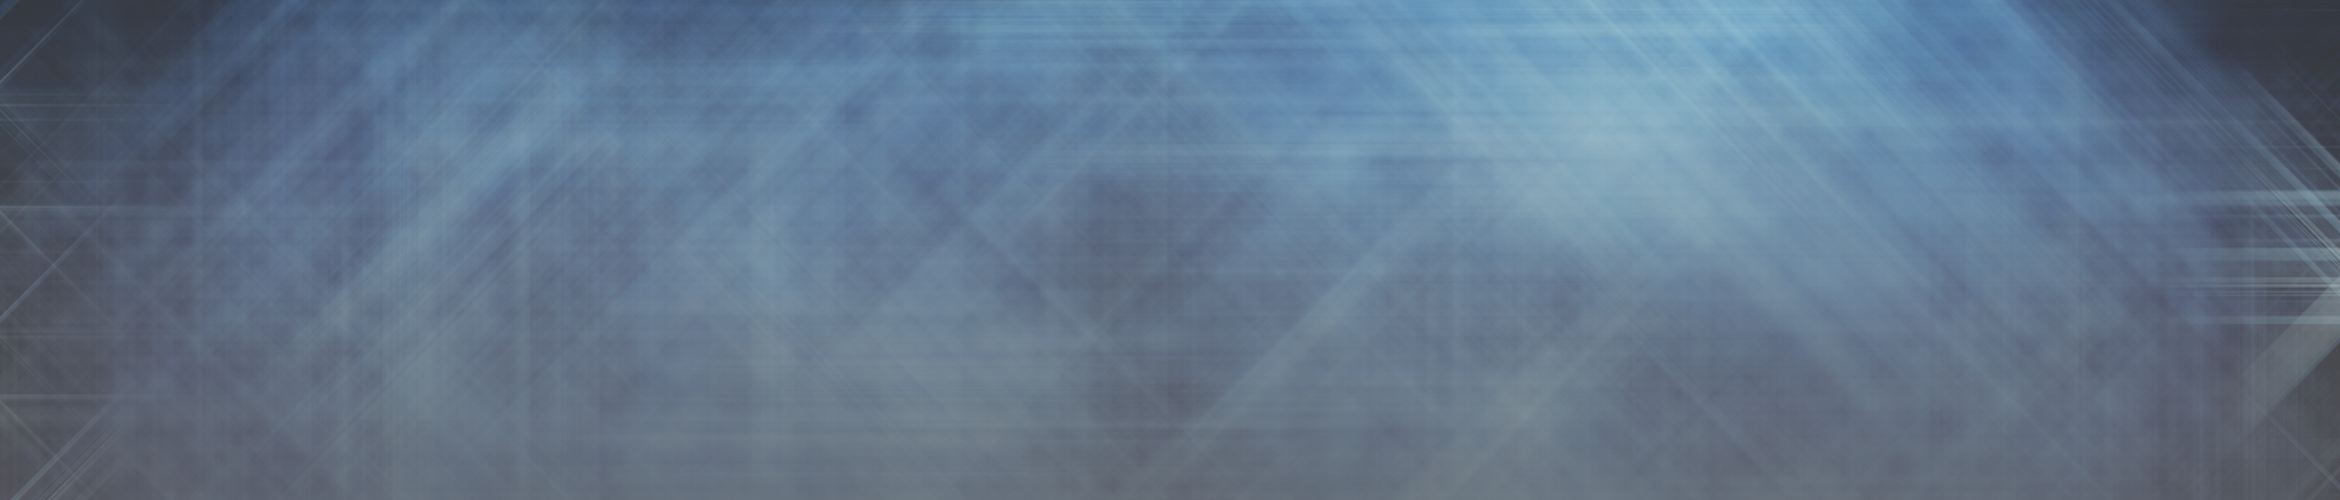 Diversity_Cyber_Academy_2340x500_Banner.png